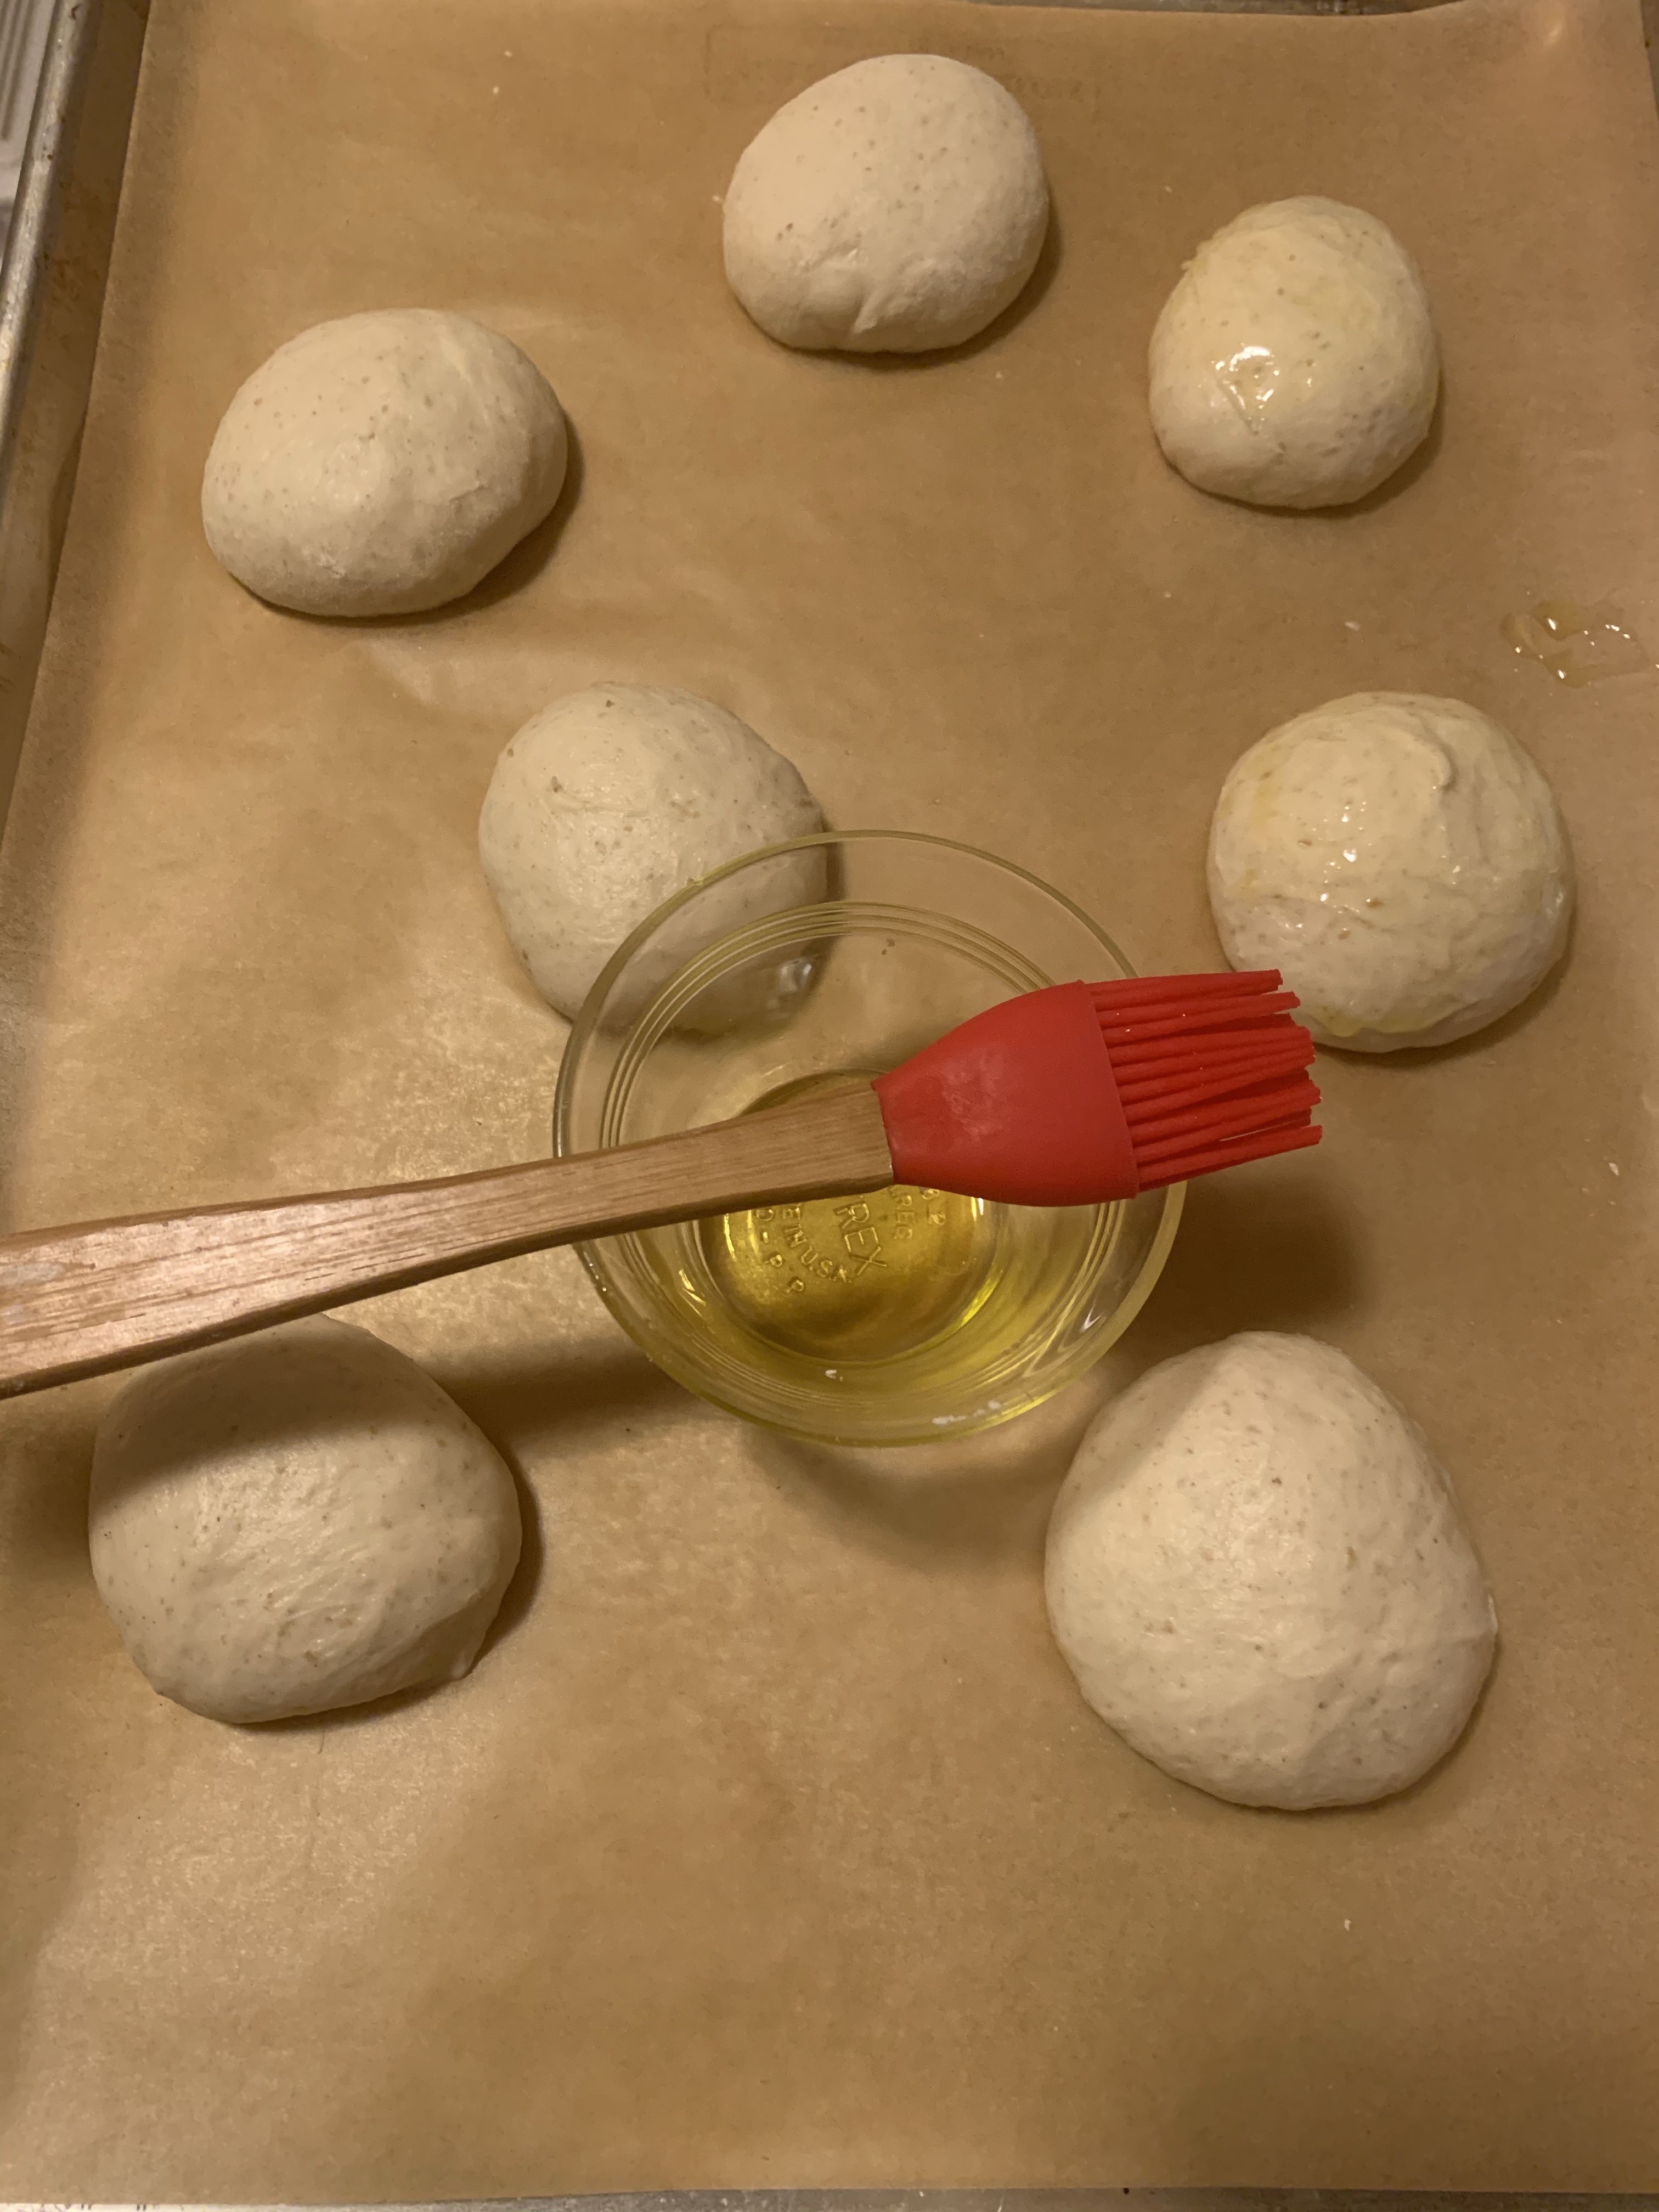 Seven rolls on parchment paper, some covered in oil. A glass dish of olive oil and rubber pastry brush are among the rolls.